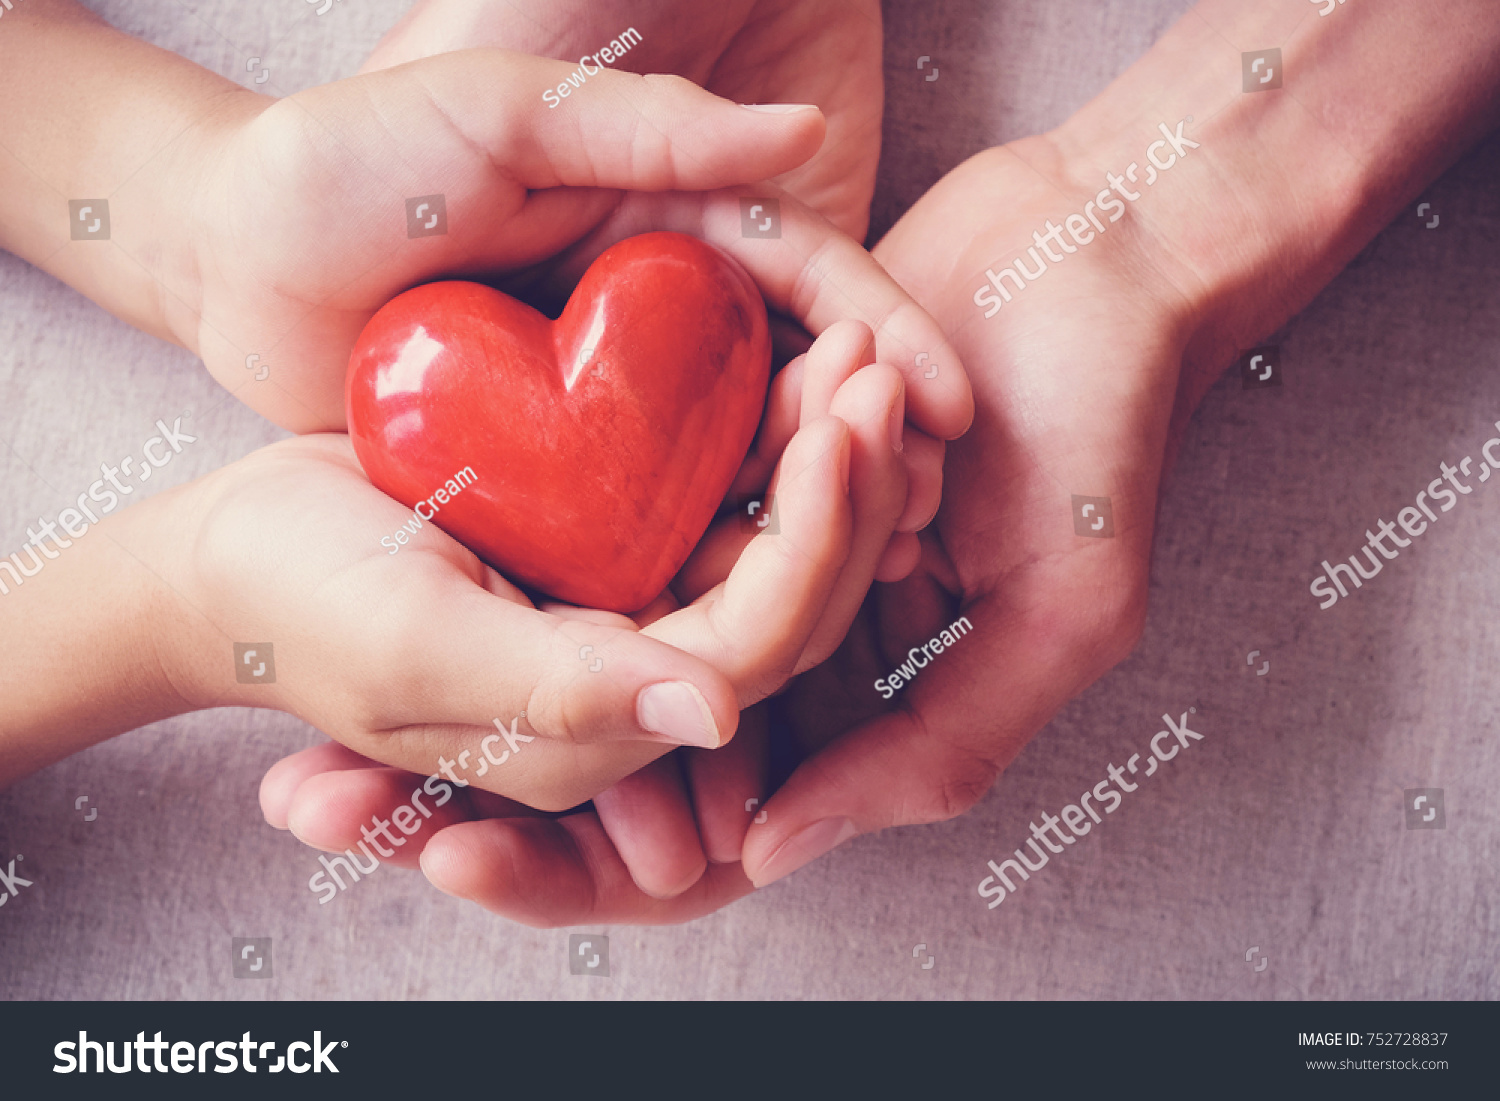 adult and child hands holding red heart, health care, love, organ donation, family insurance and CSR concept, world heart day, world health day, foster home care #752728837